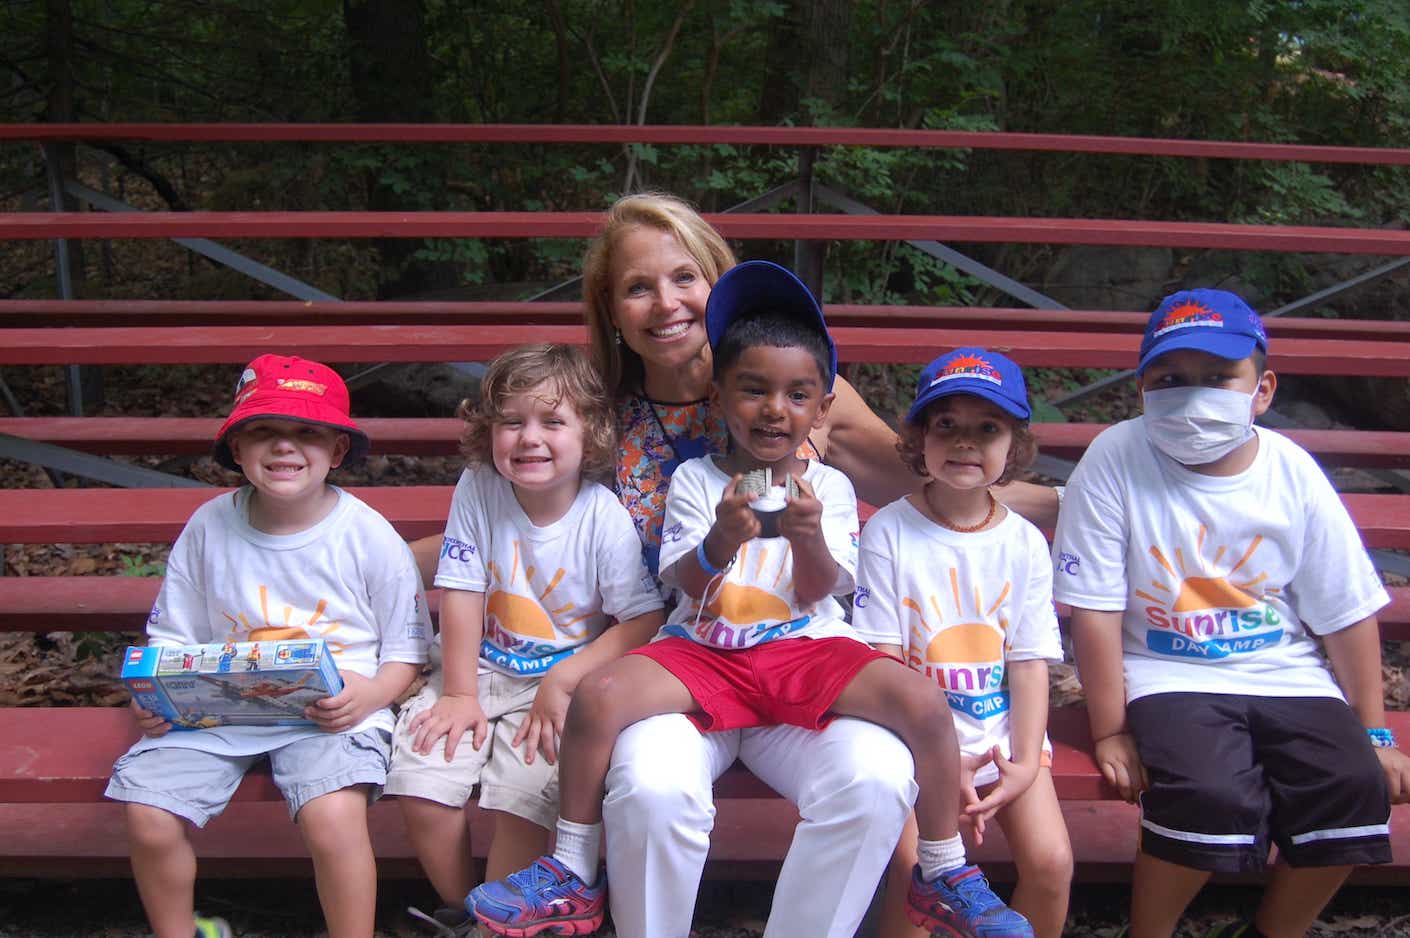 Katie Couric smiles and holds several young campers on a set of red bleachers.